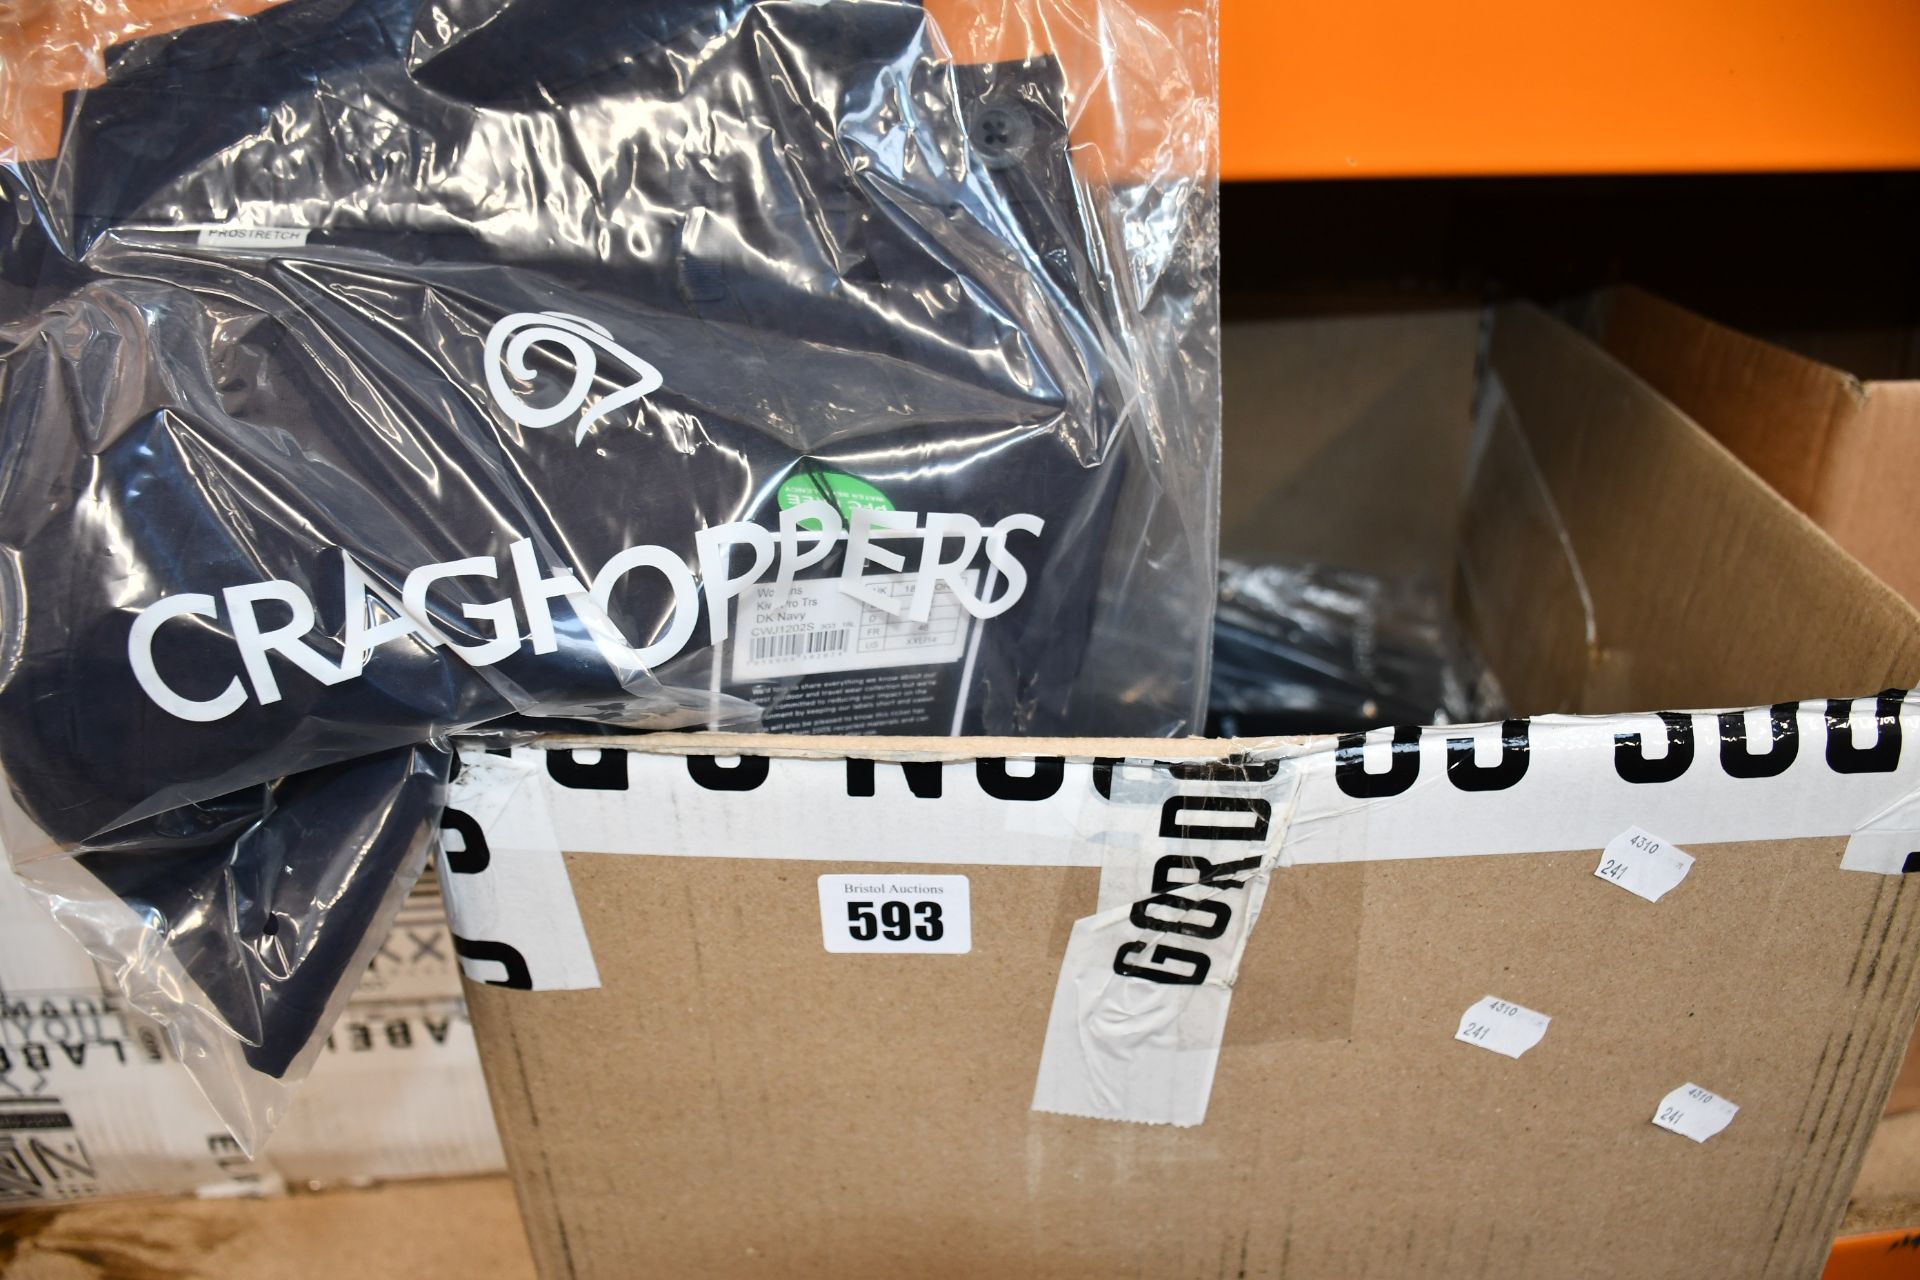 Fifteen pairs of as new Craghoppers Kiwi Pro trousers (Men's and women's assorted sizes).